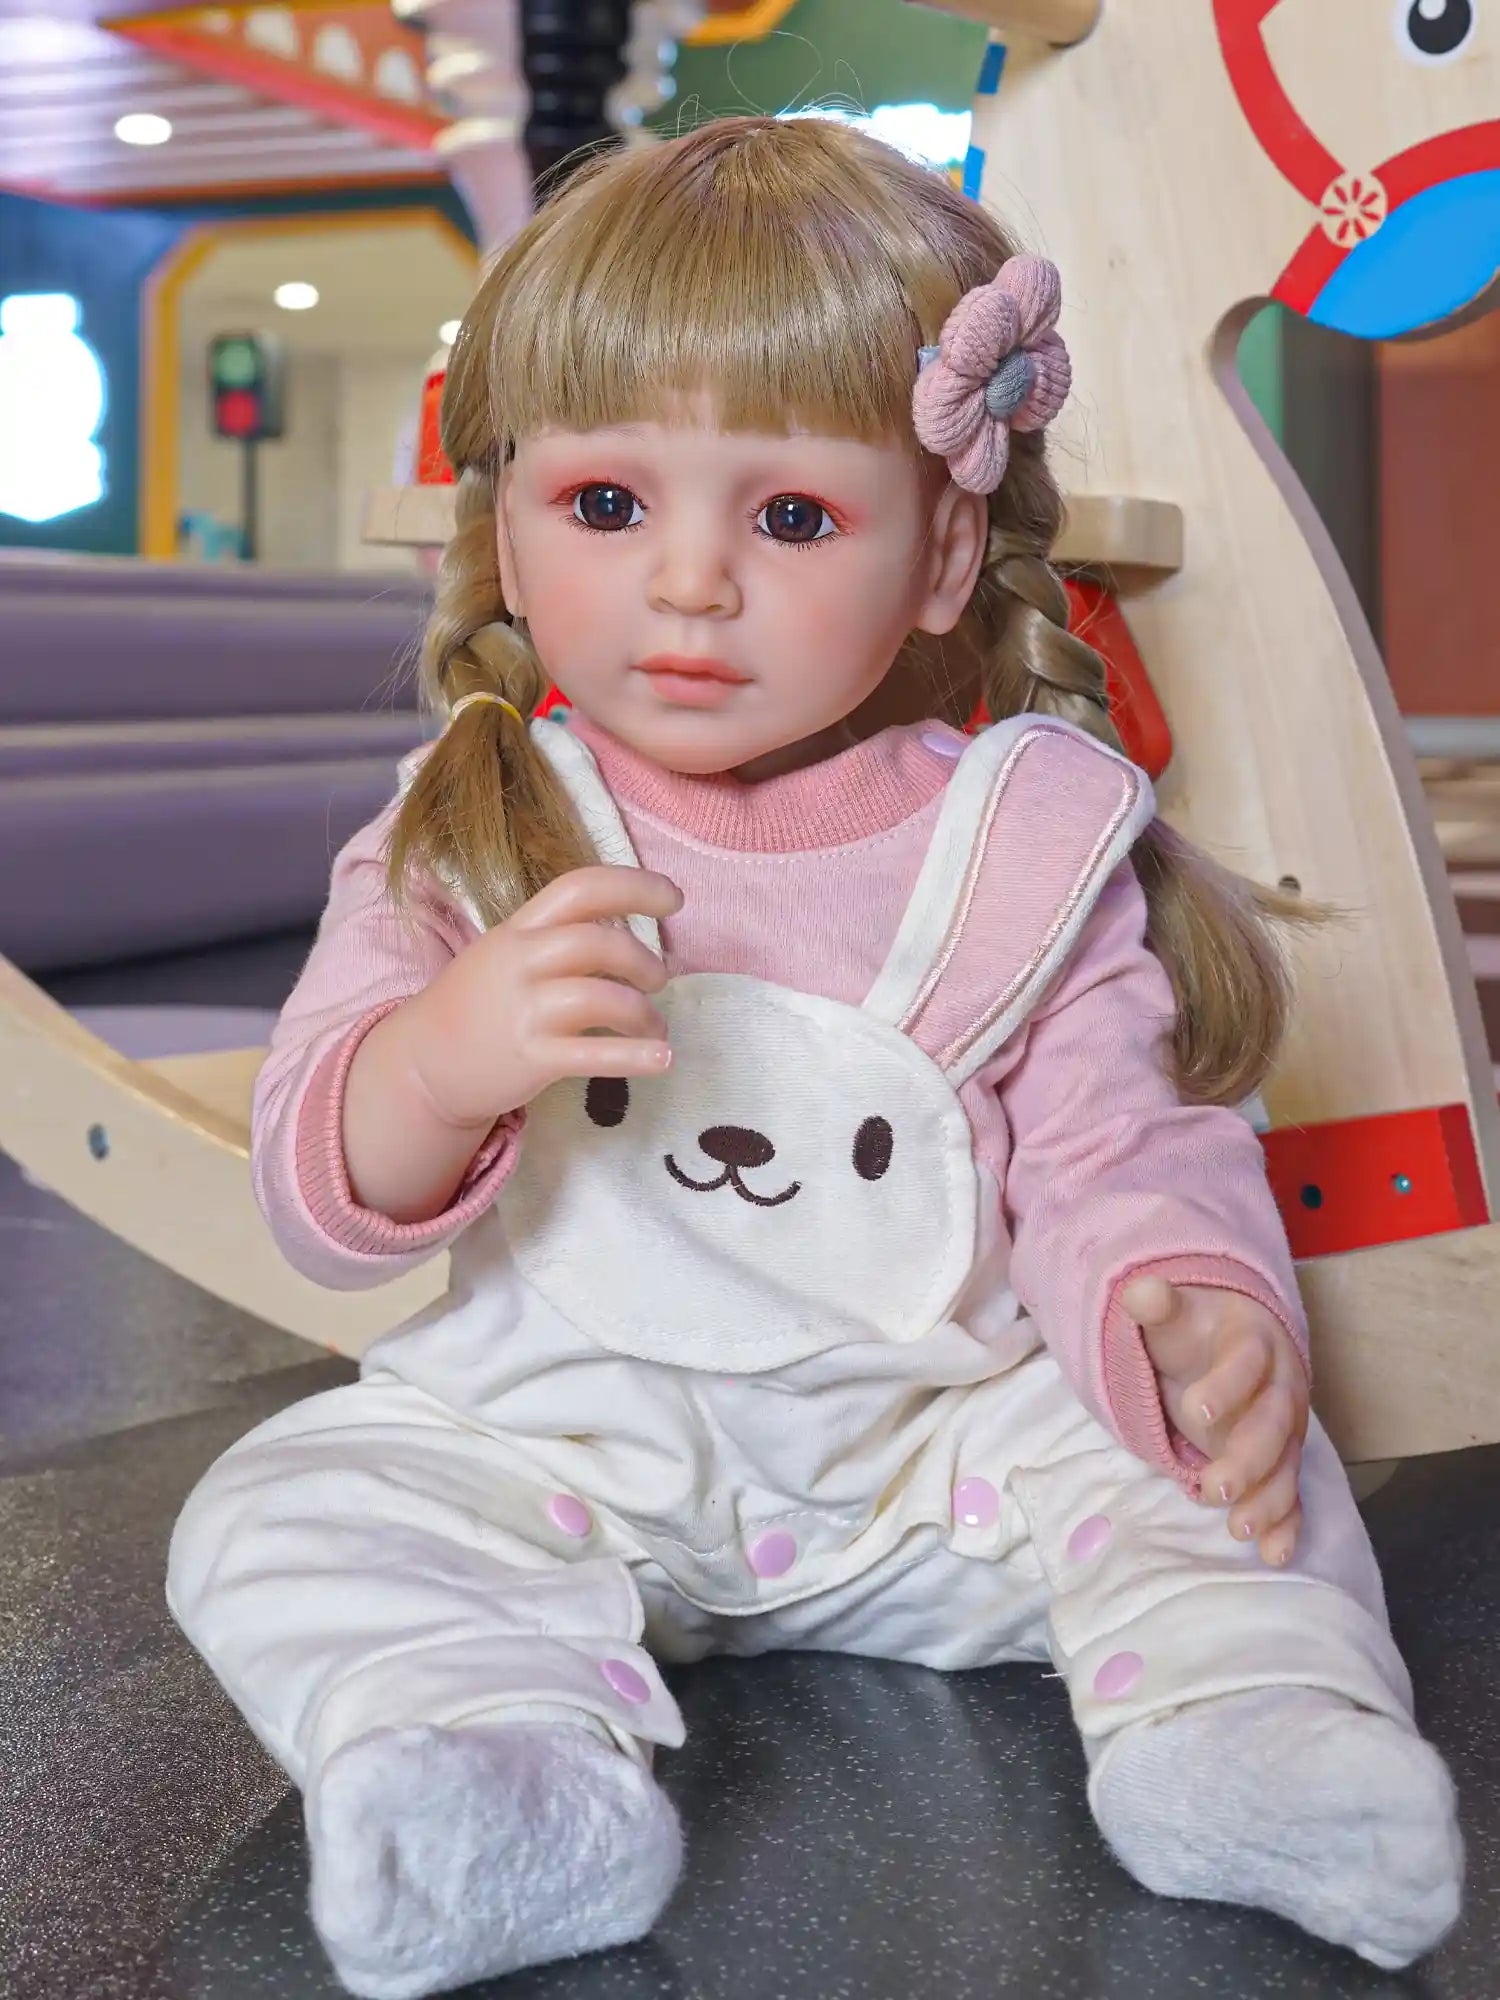 Toddler doll seated on a play mat, wearing a cozy pink and white outfit with a bear motif, in a playful indoor environment.